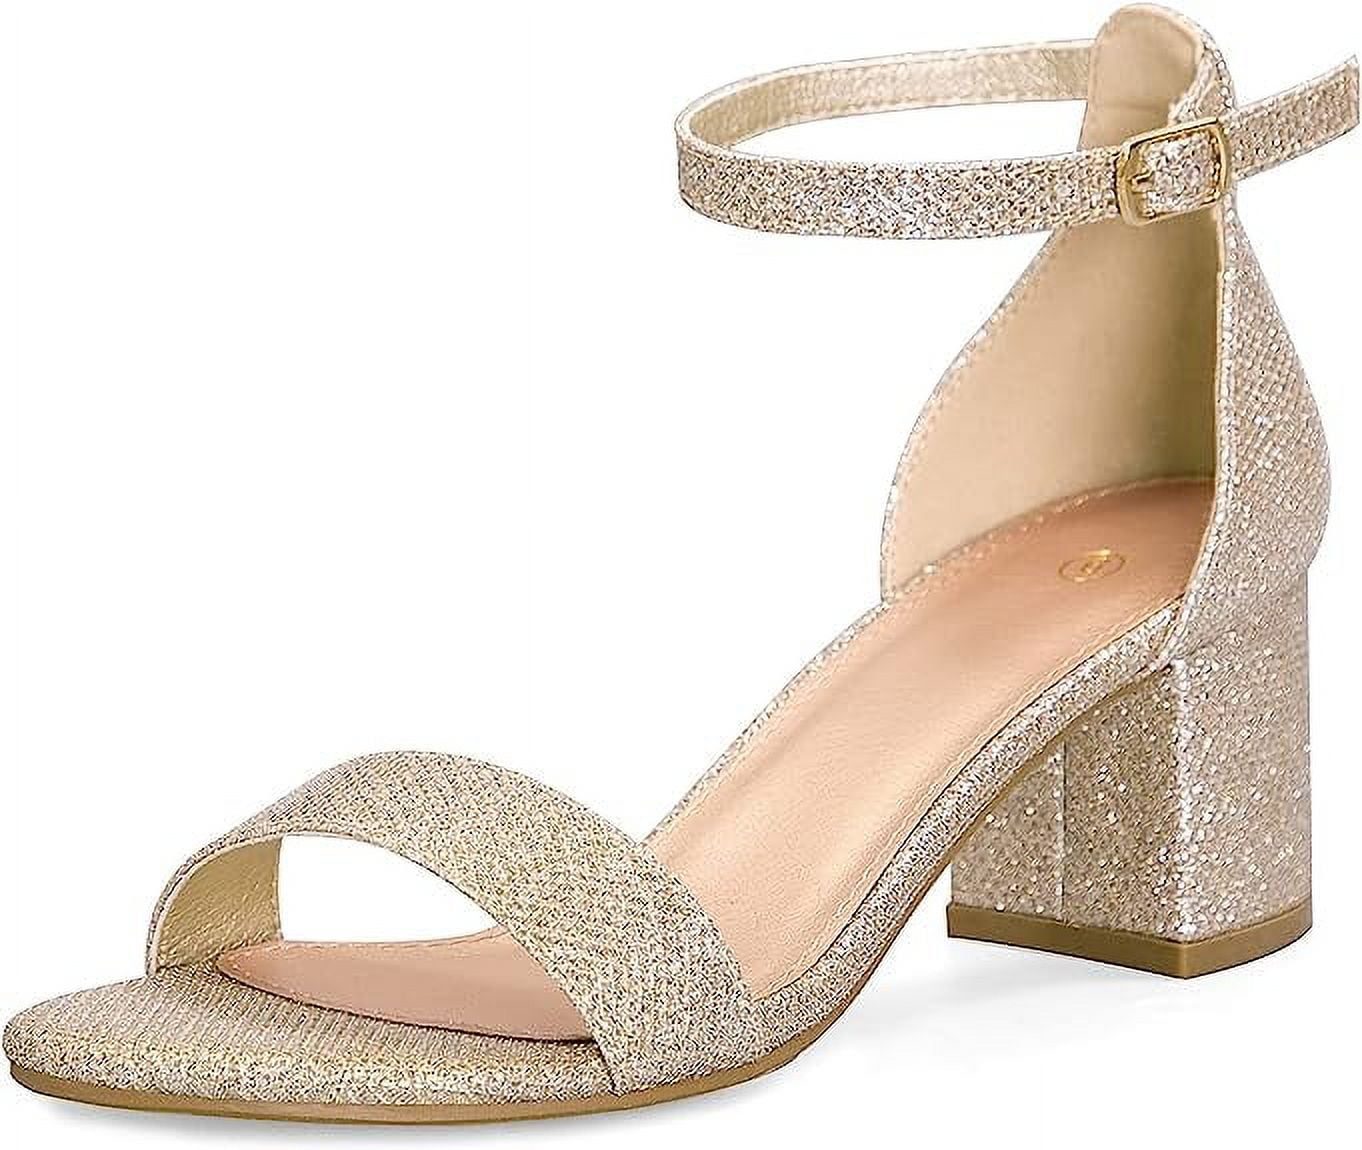 True Decadence Gold Glitter Ankle Strap Heeled Sandals | ASOS